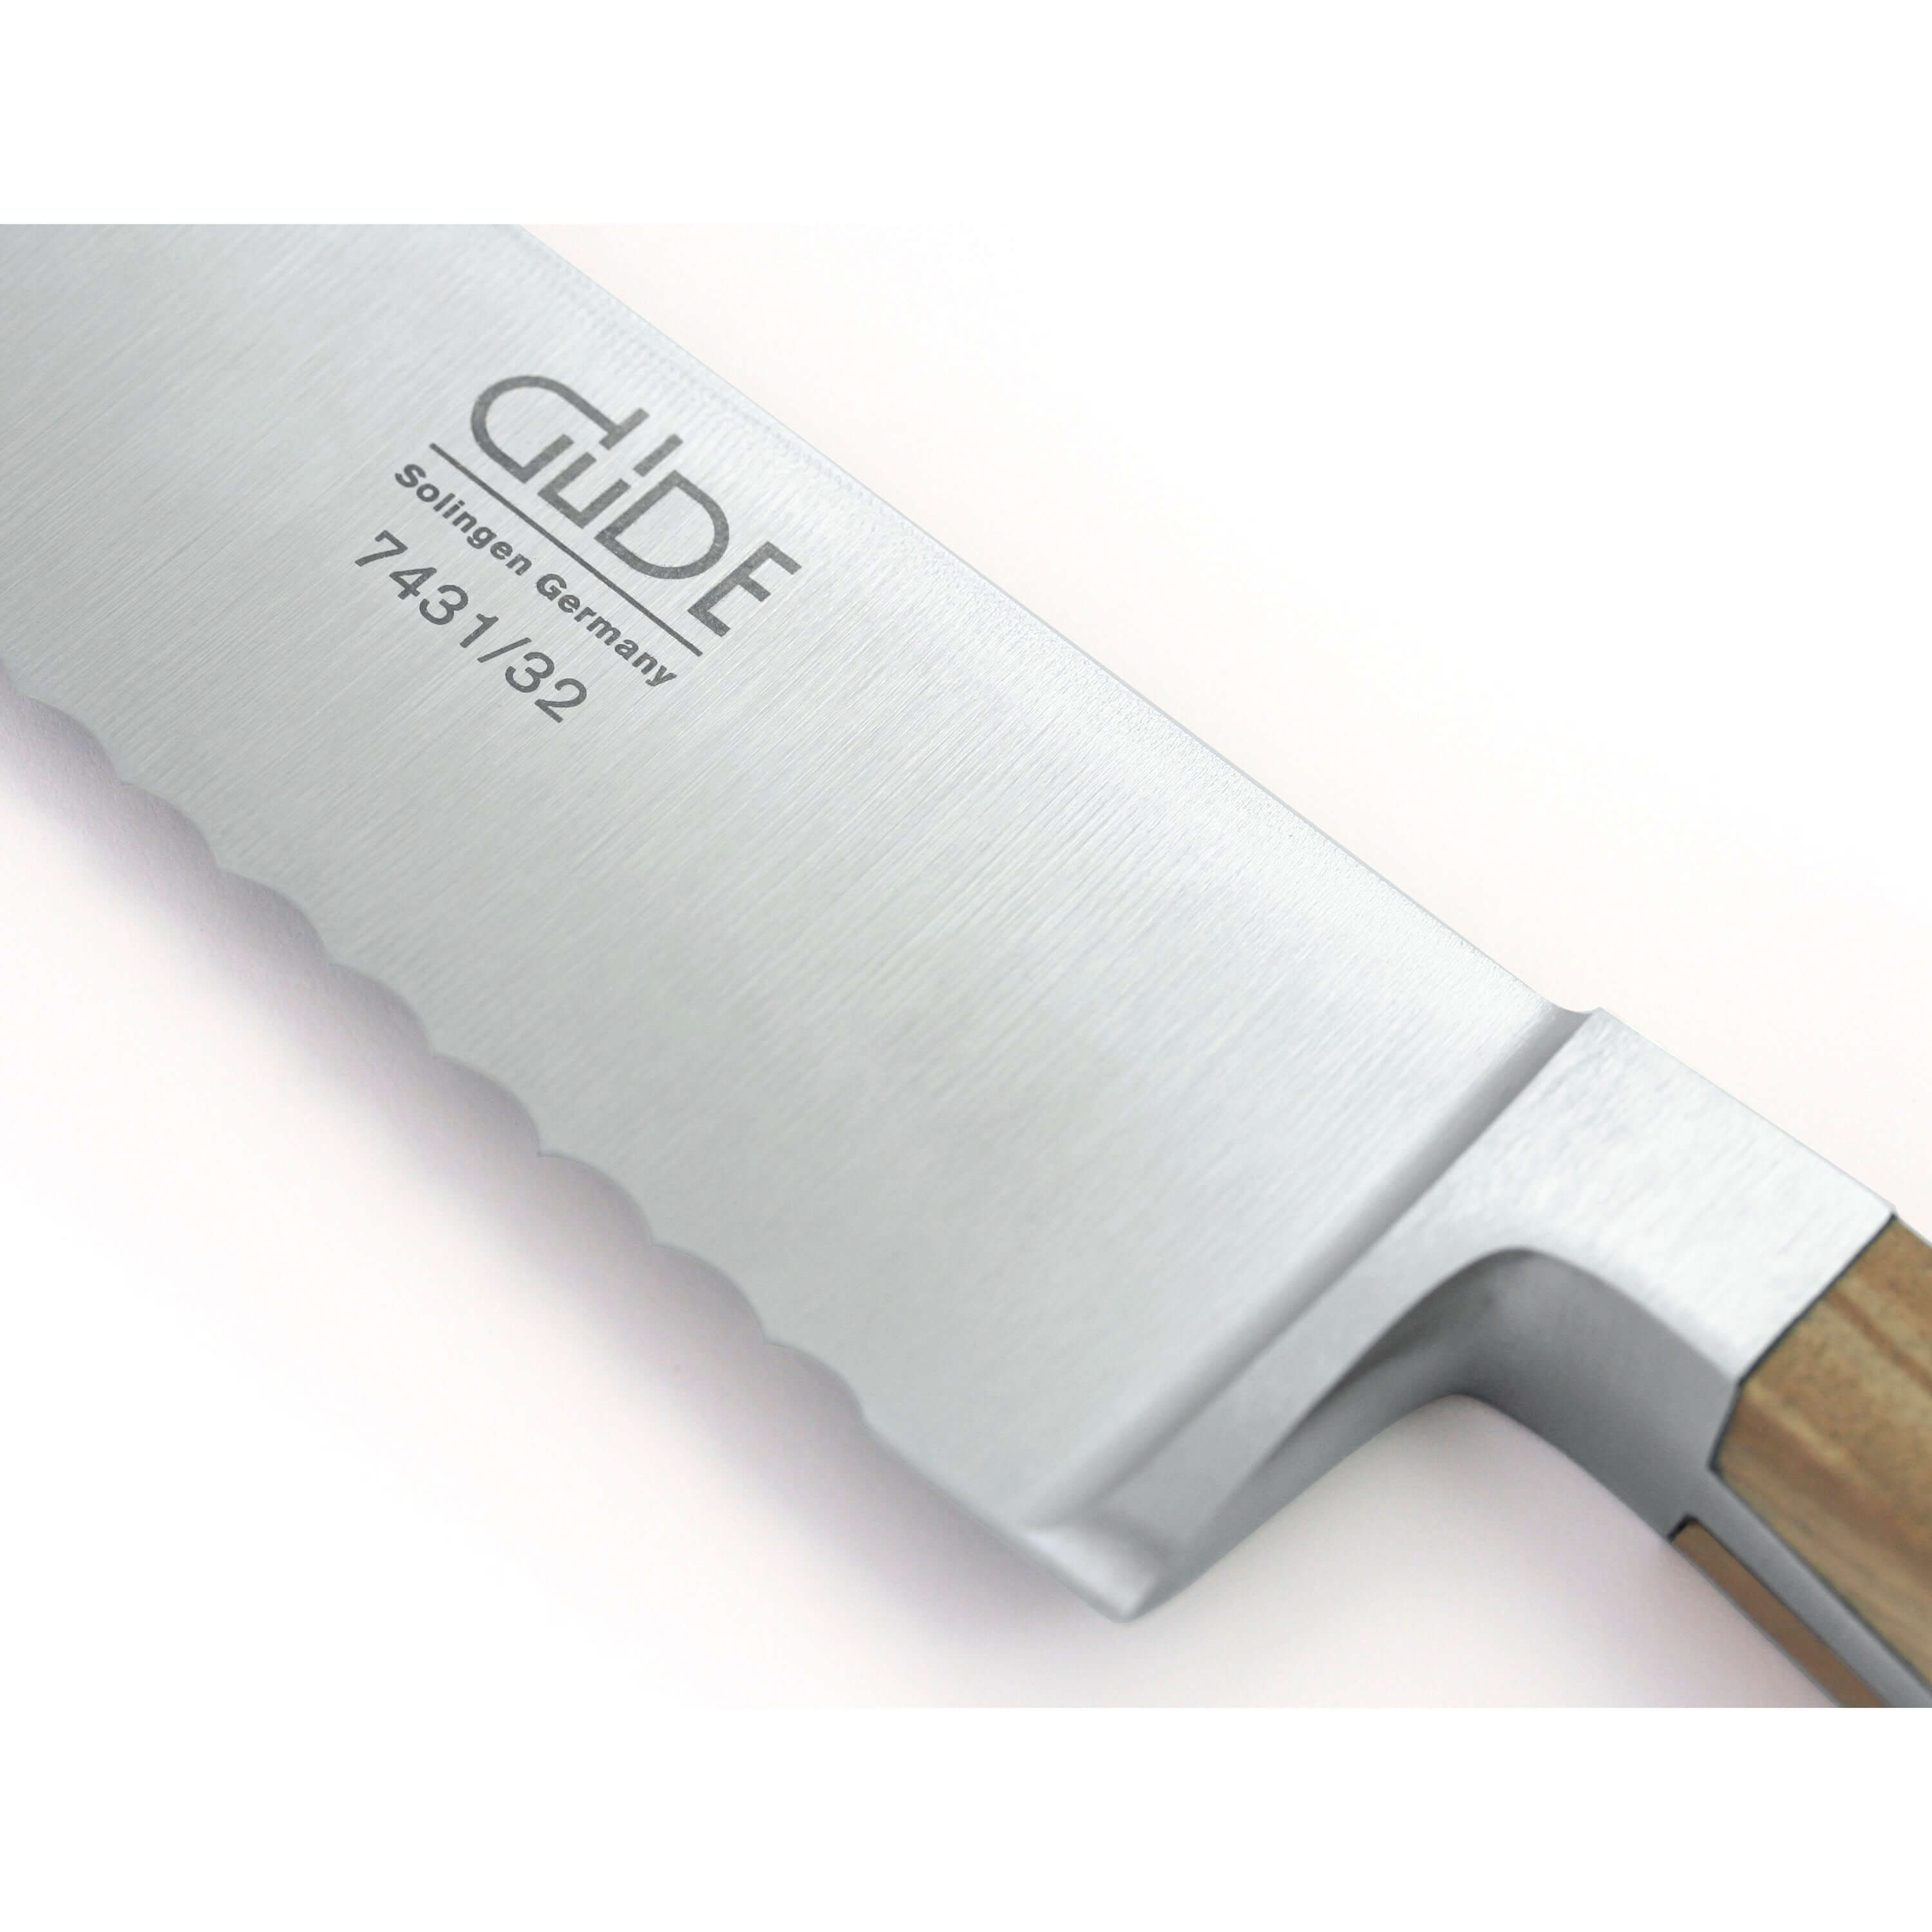 ALPHA OLIVE | Bread Knife Franz Dude 12.5 " Right hand version | Forged steel / Olive Wood Handle